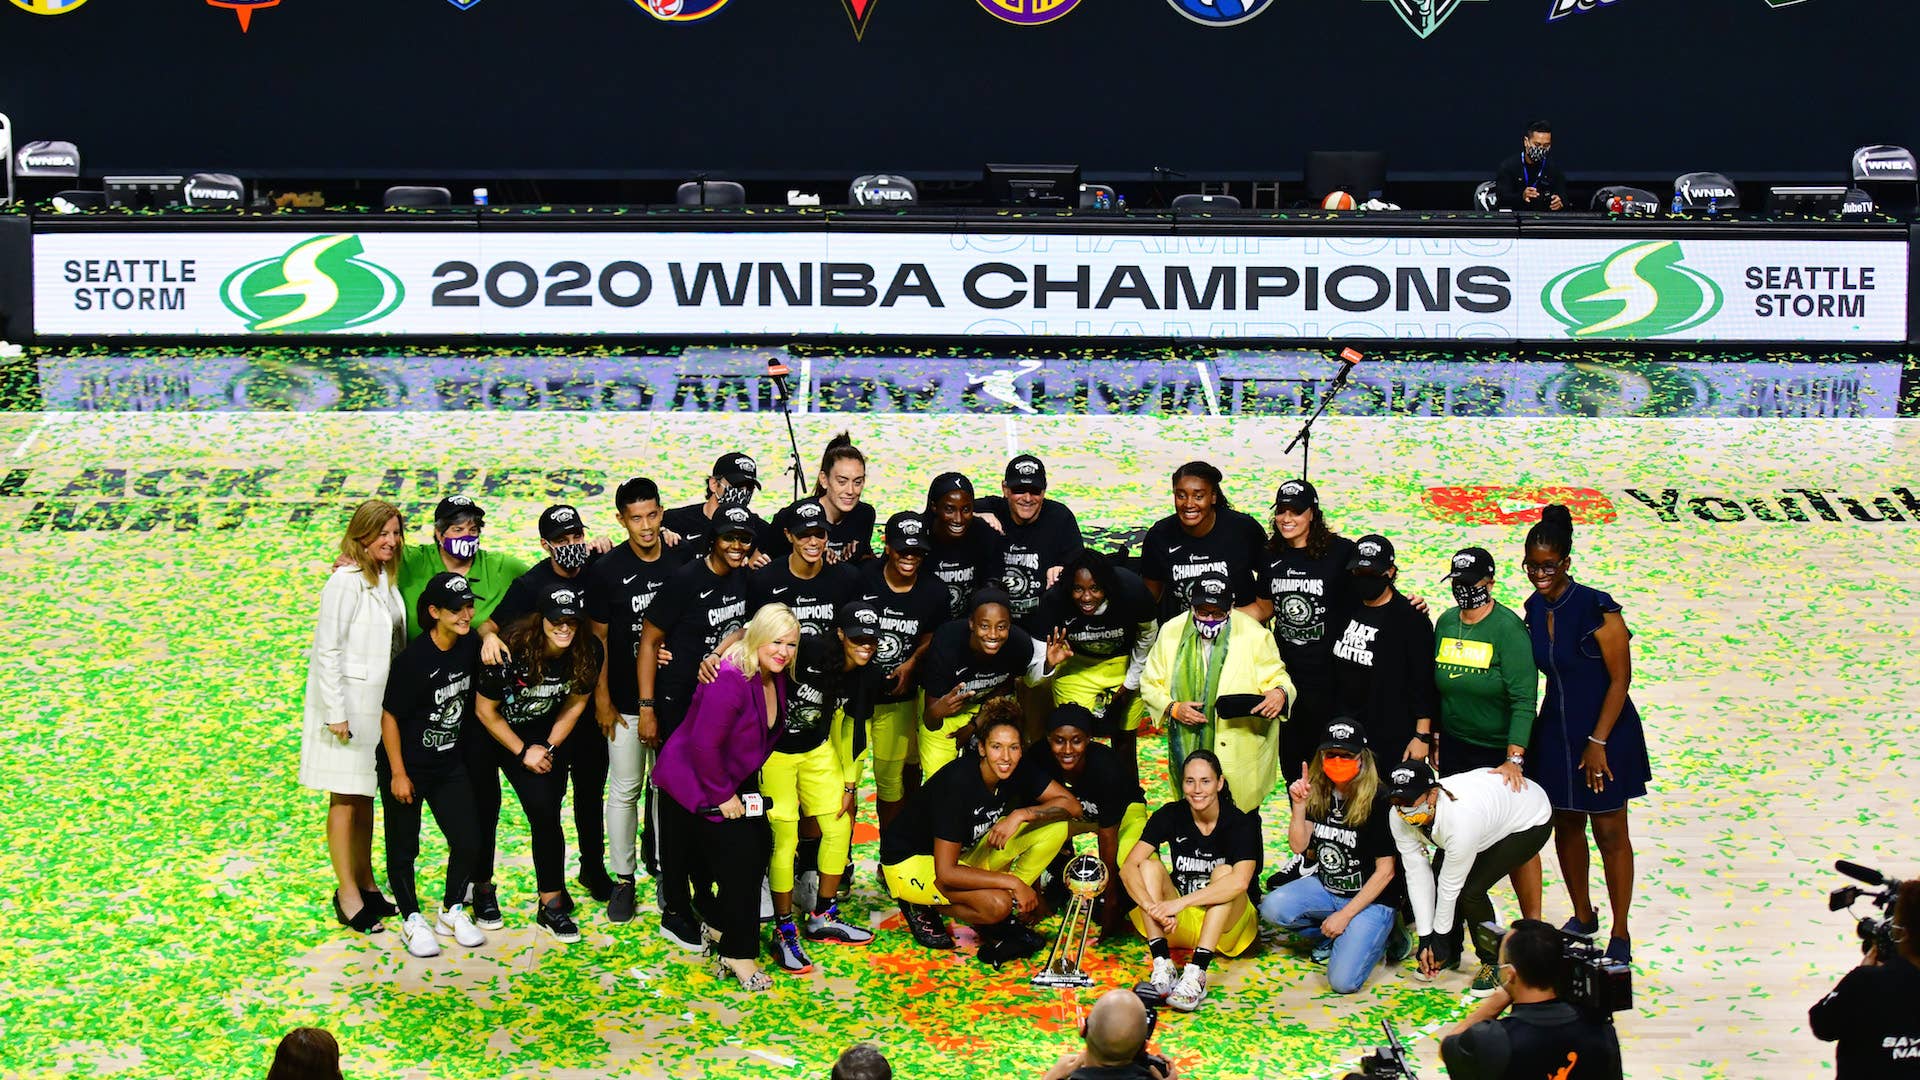 The Seattle Storm pose for a picture after winning the WNBA Championship